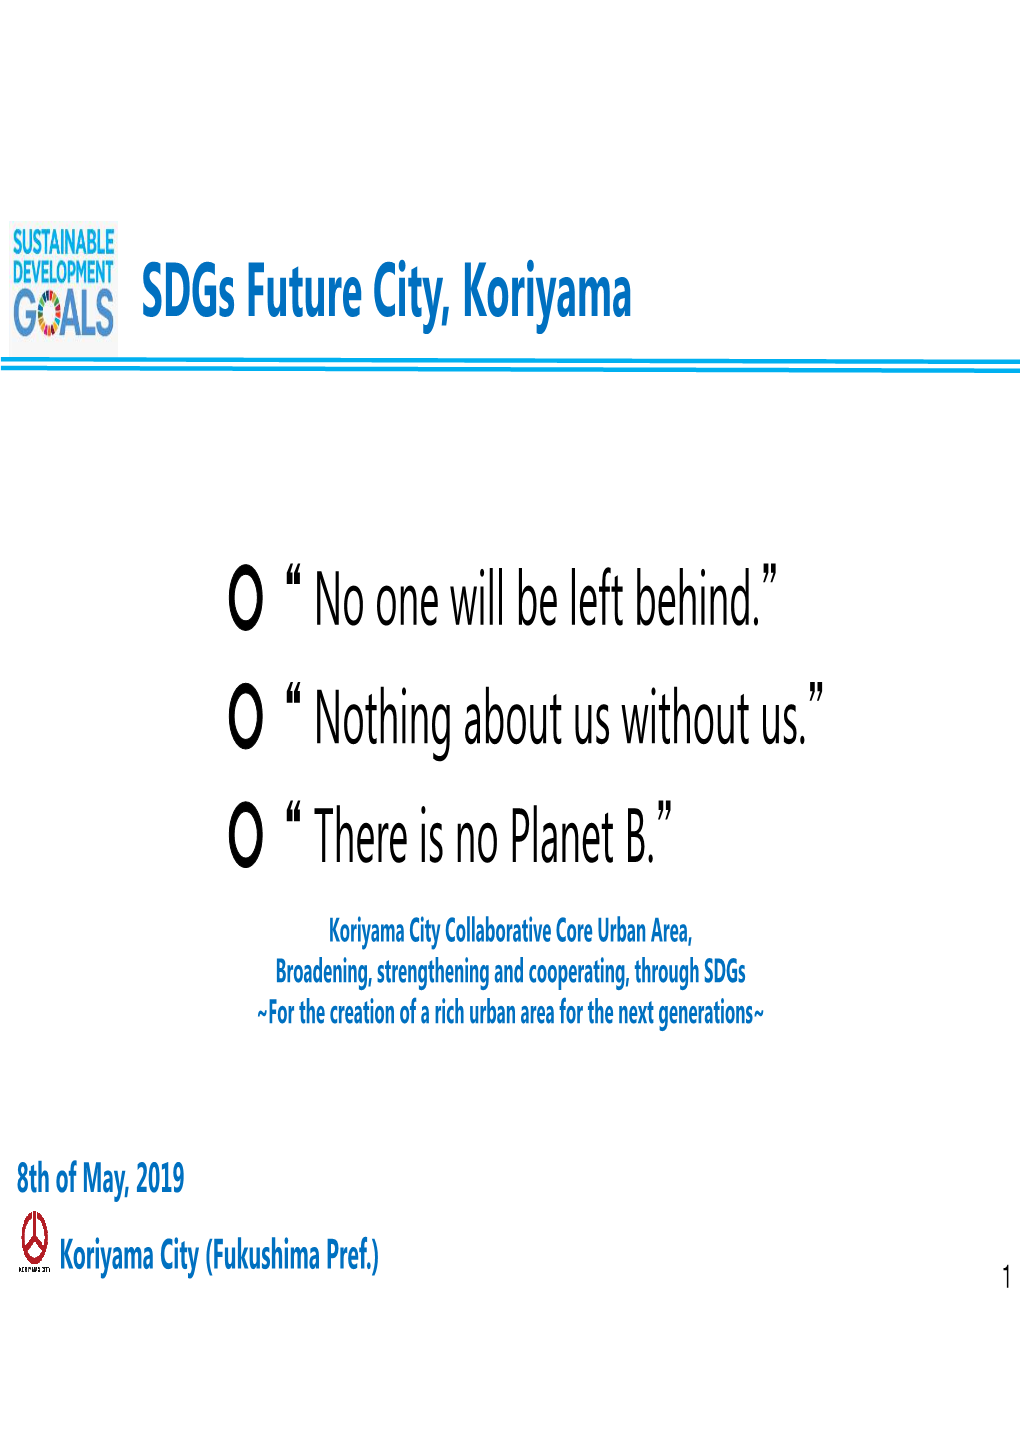 Koriyama City Collaborative Core Urban Area, Broadening, Strengthening and Cooperating, Through Sdgs ~For the Creation of a Rich Urban Area for the Next Generations~